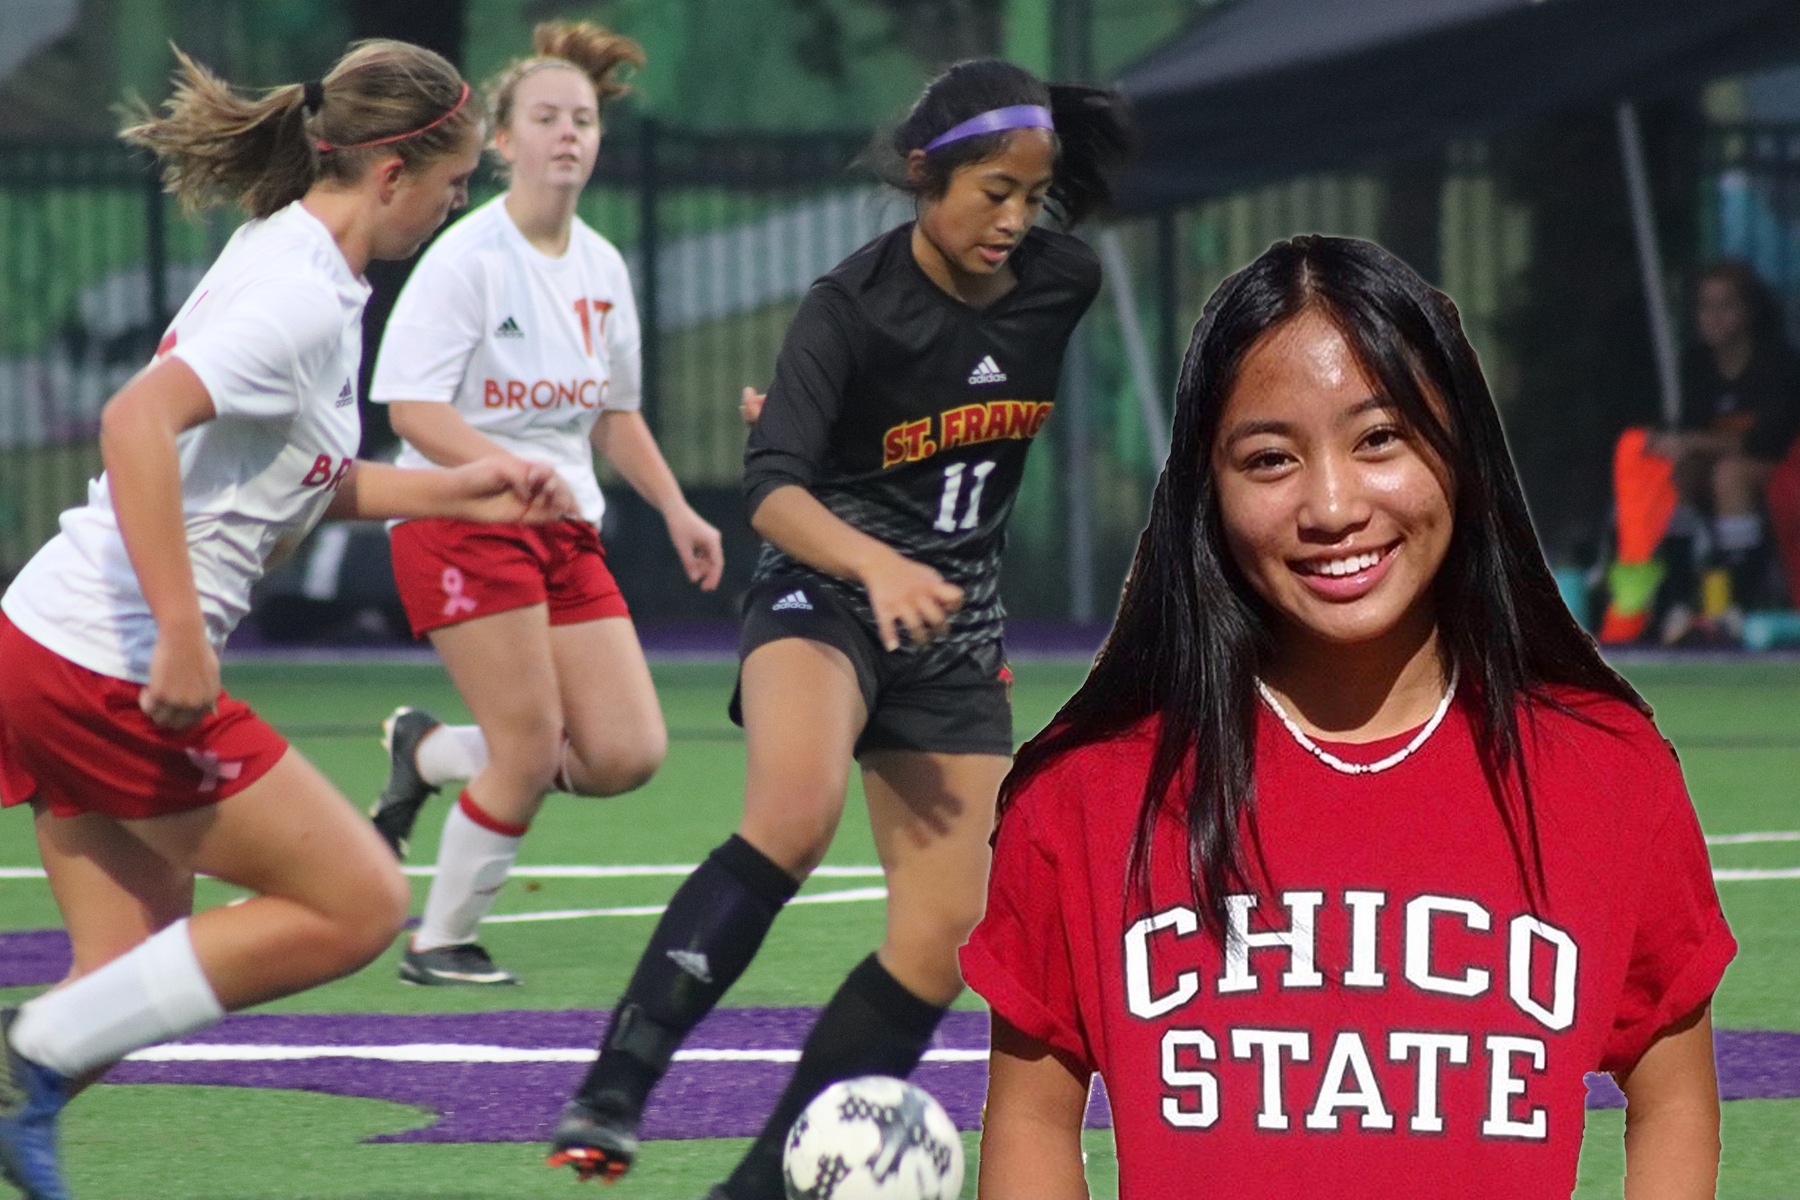 Soccer’s Billena to Sign with Chico State Soccer